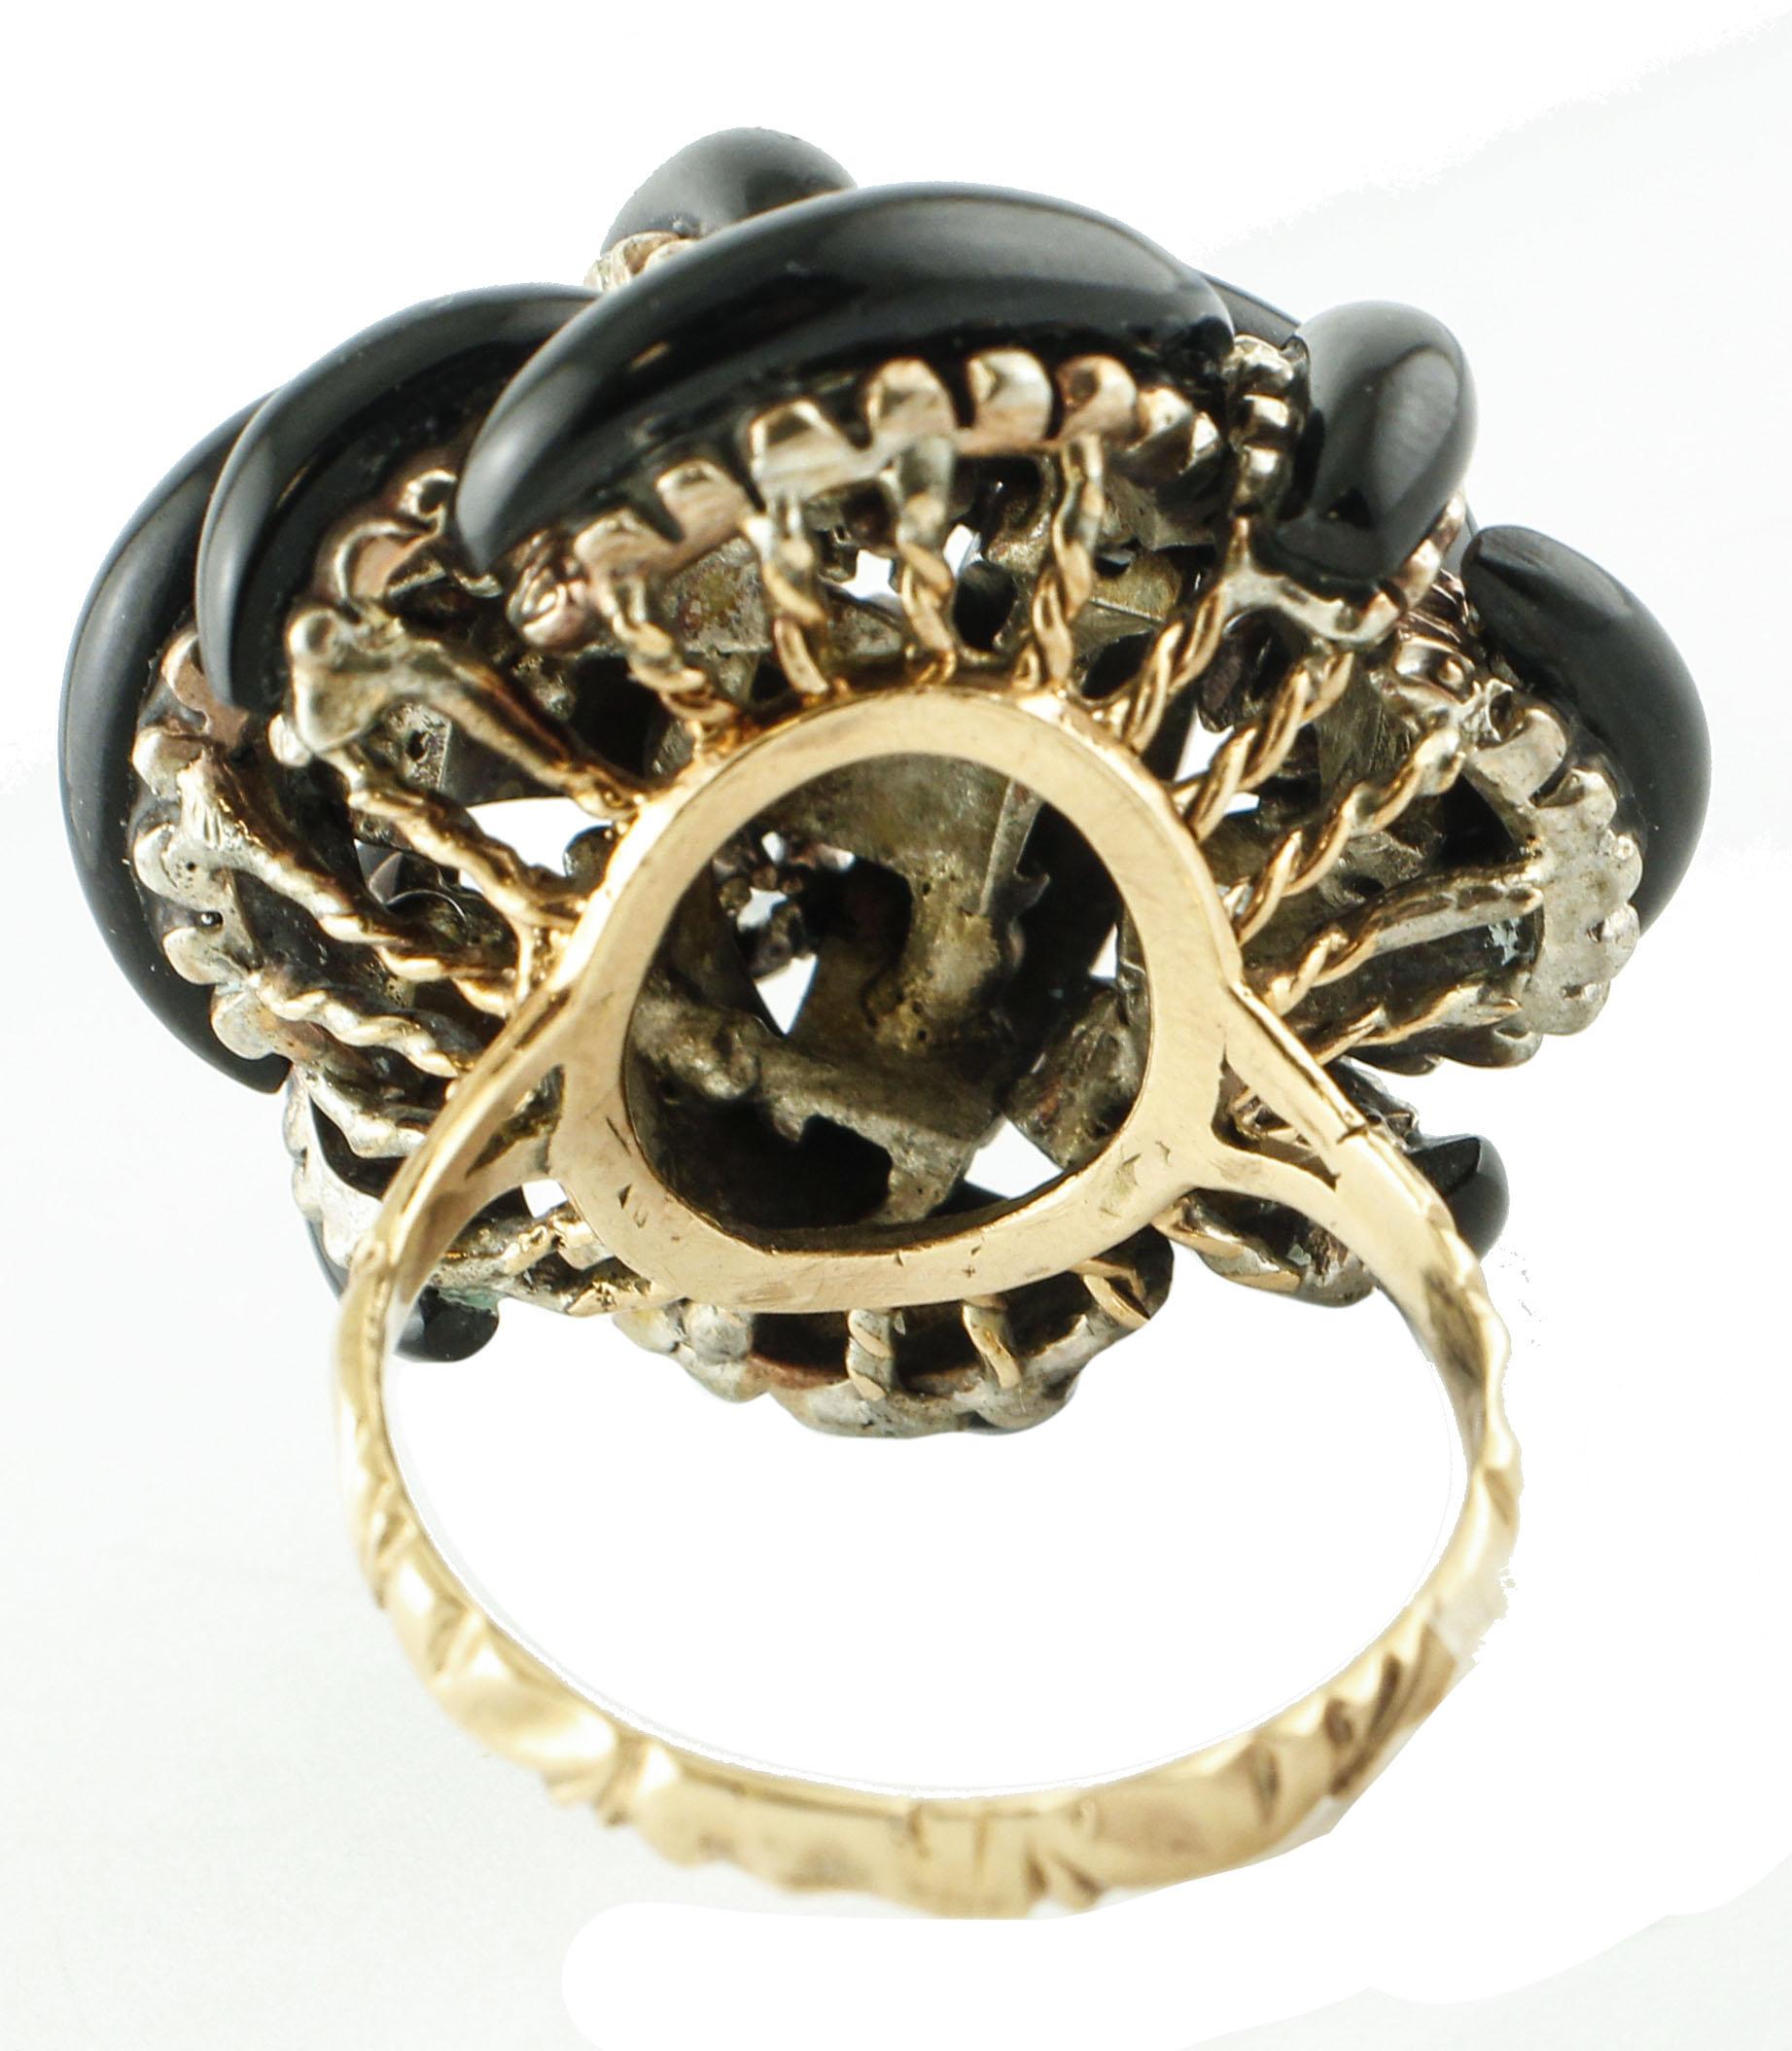 Retro Onyx and Diamonds Net, 9 Karat Rose Gold and Silver Cocktail Ring